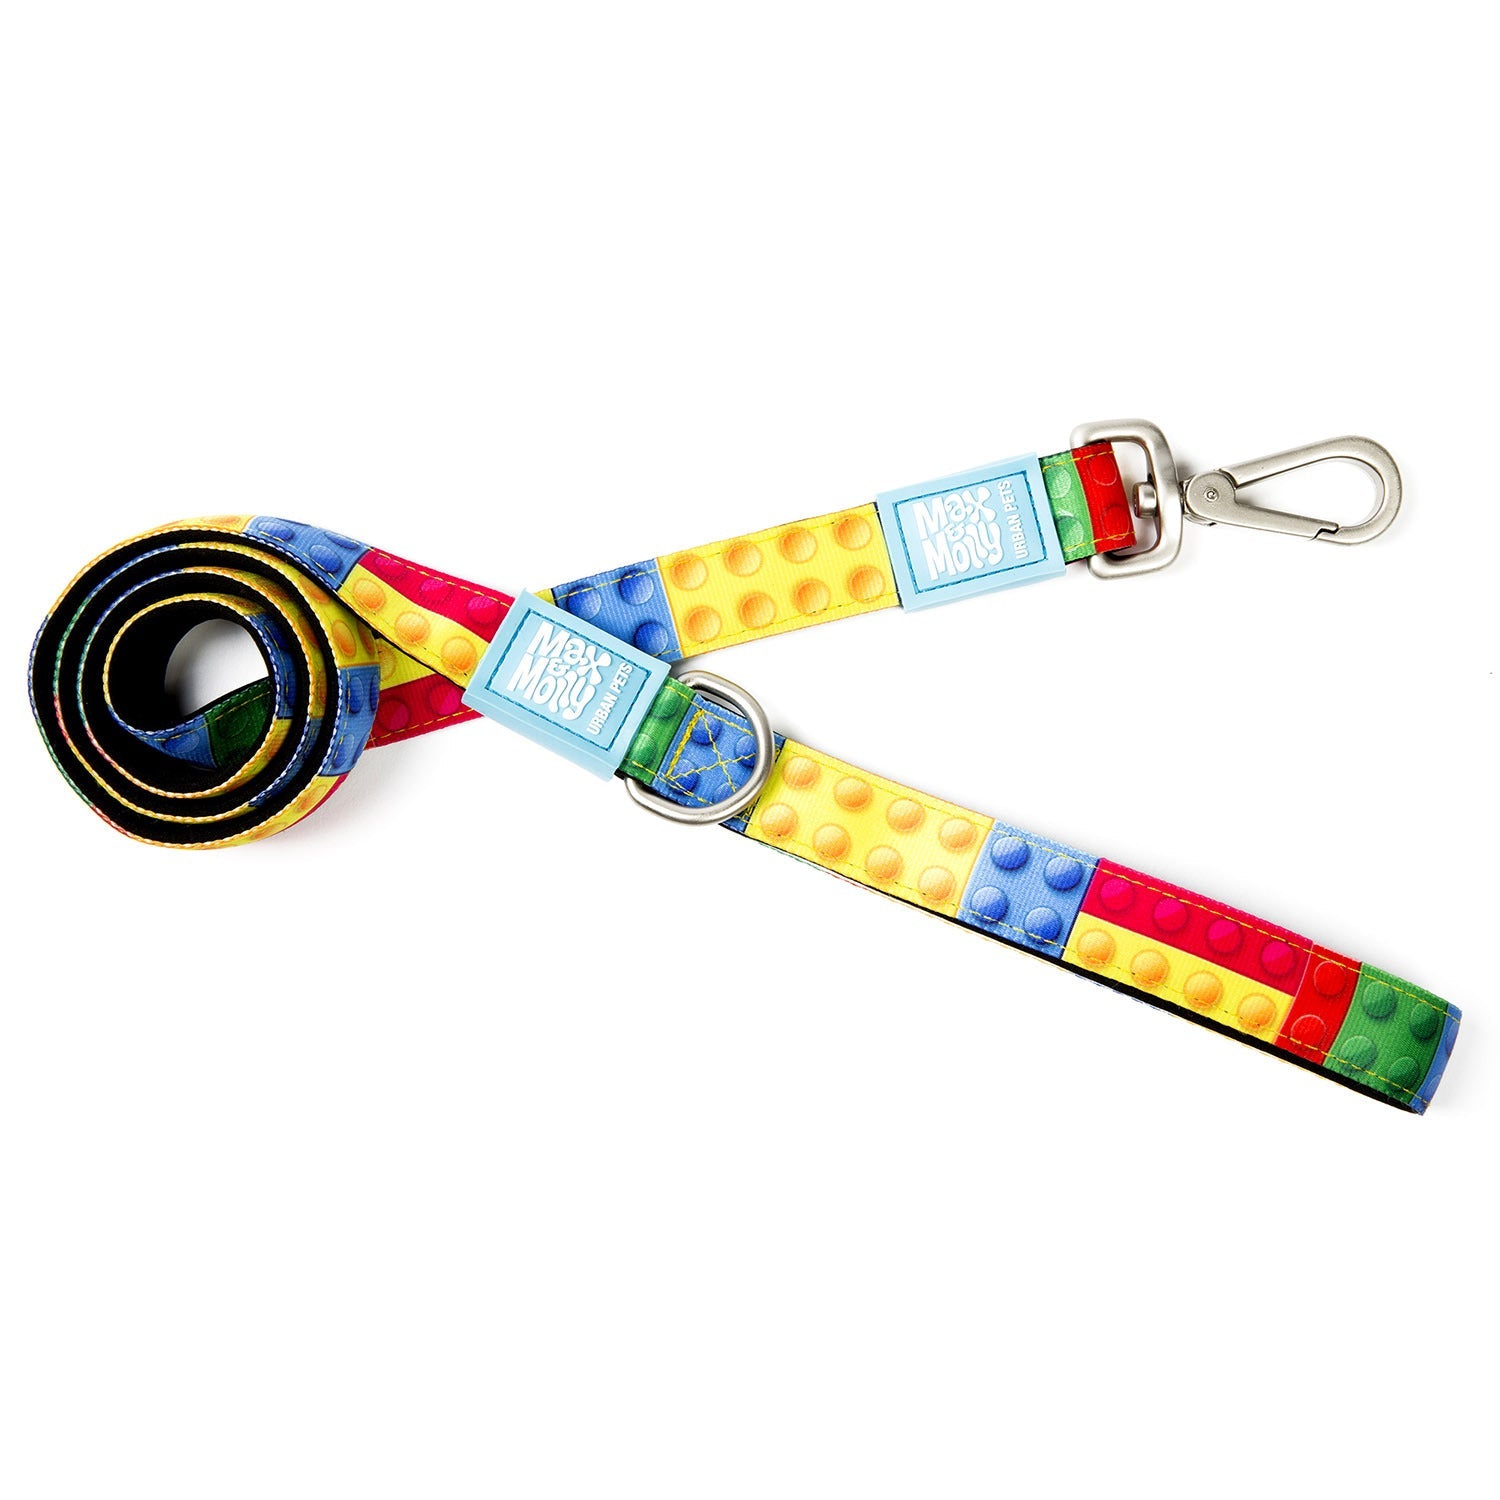 Max & Molly Dog Leash - Playtime 2.0 - Pets and More